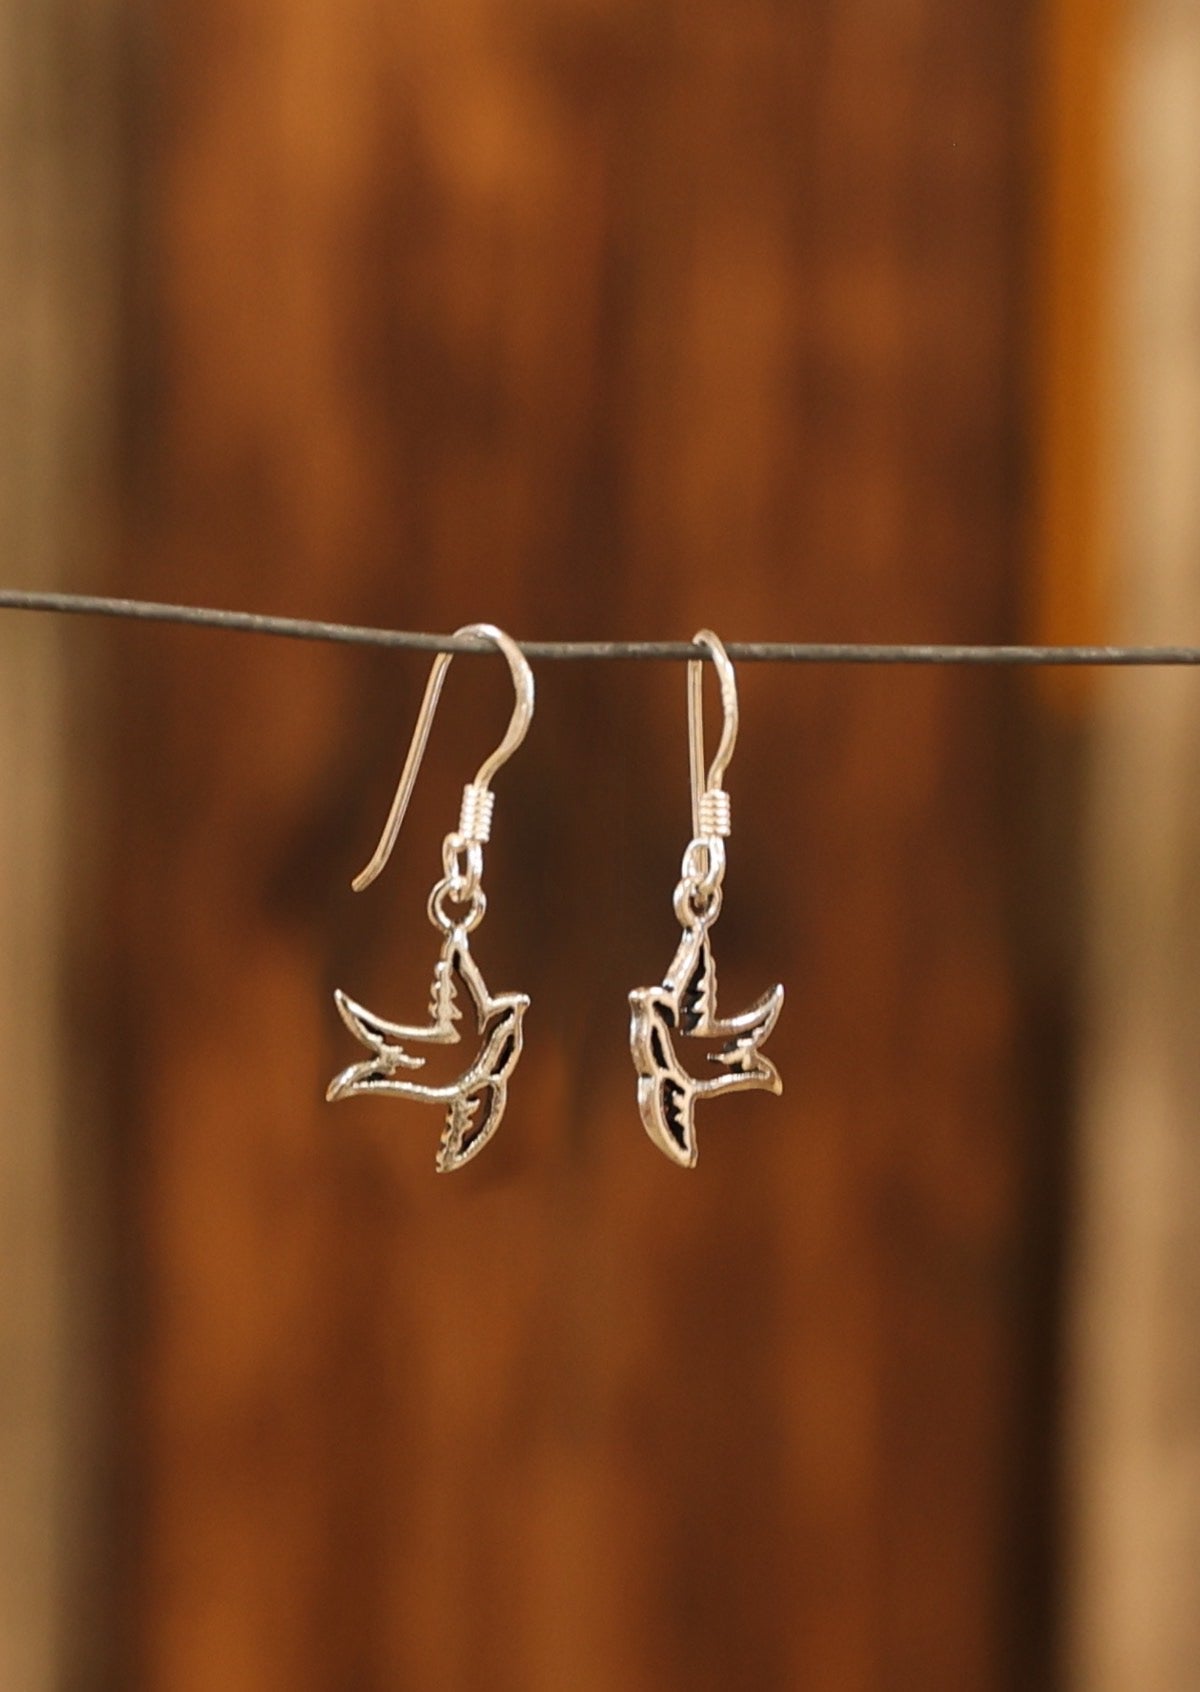 Bird cutout design crafted from sterling silver